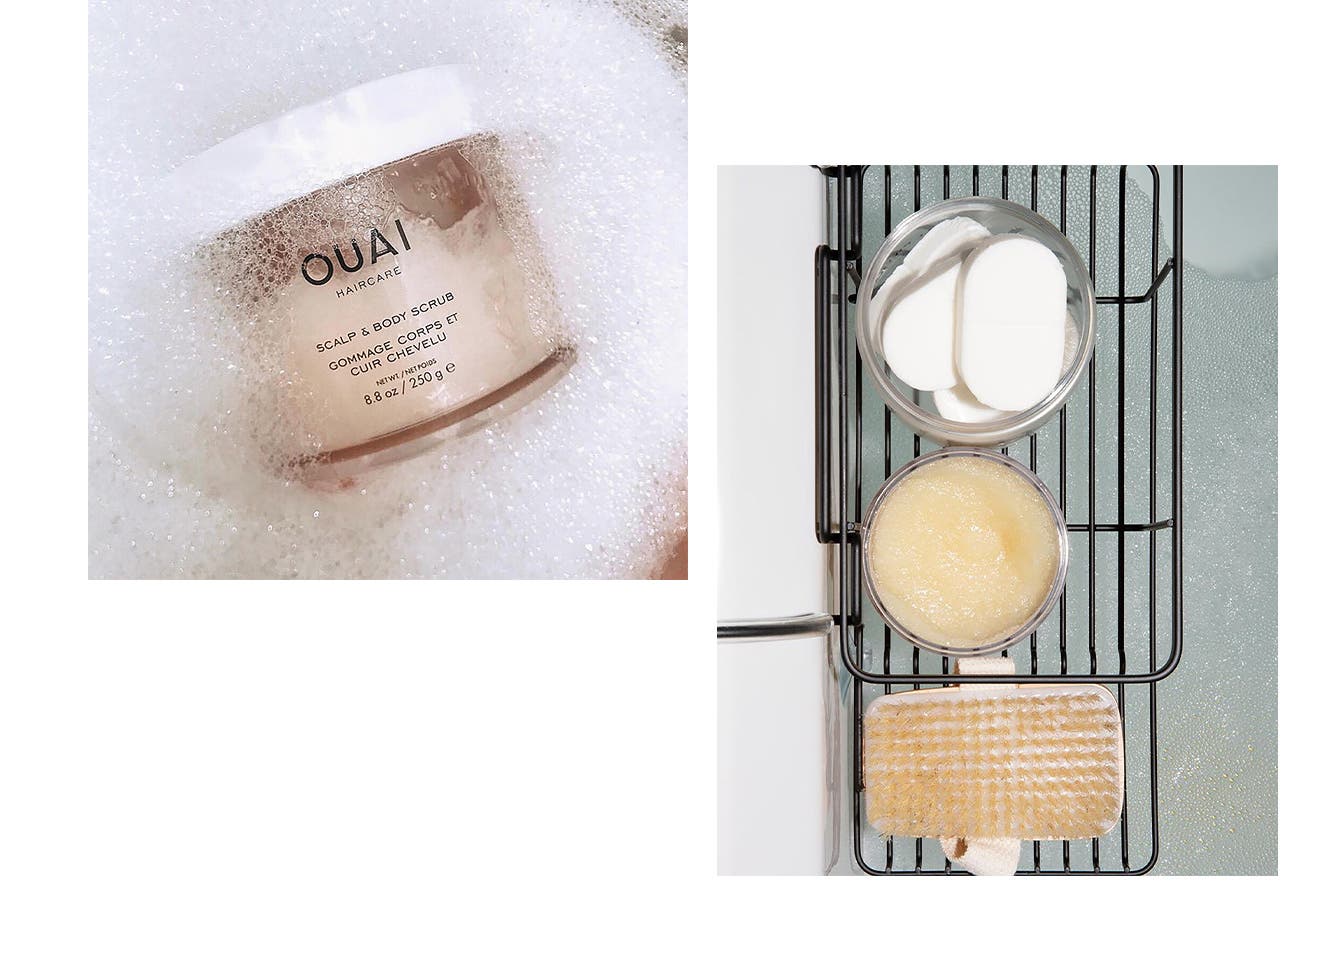 OUAI Scalp & Body Scrub with a body brush and other bath products.